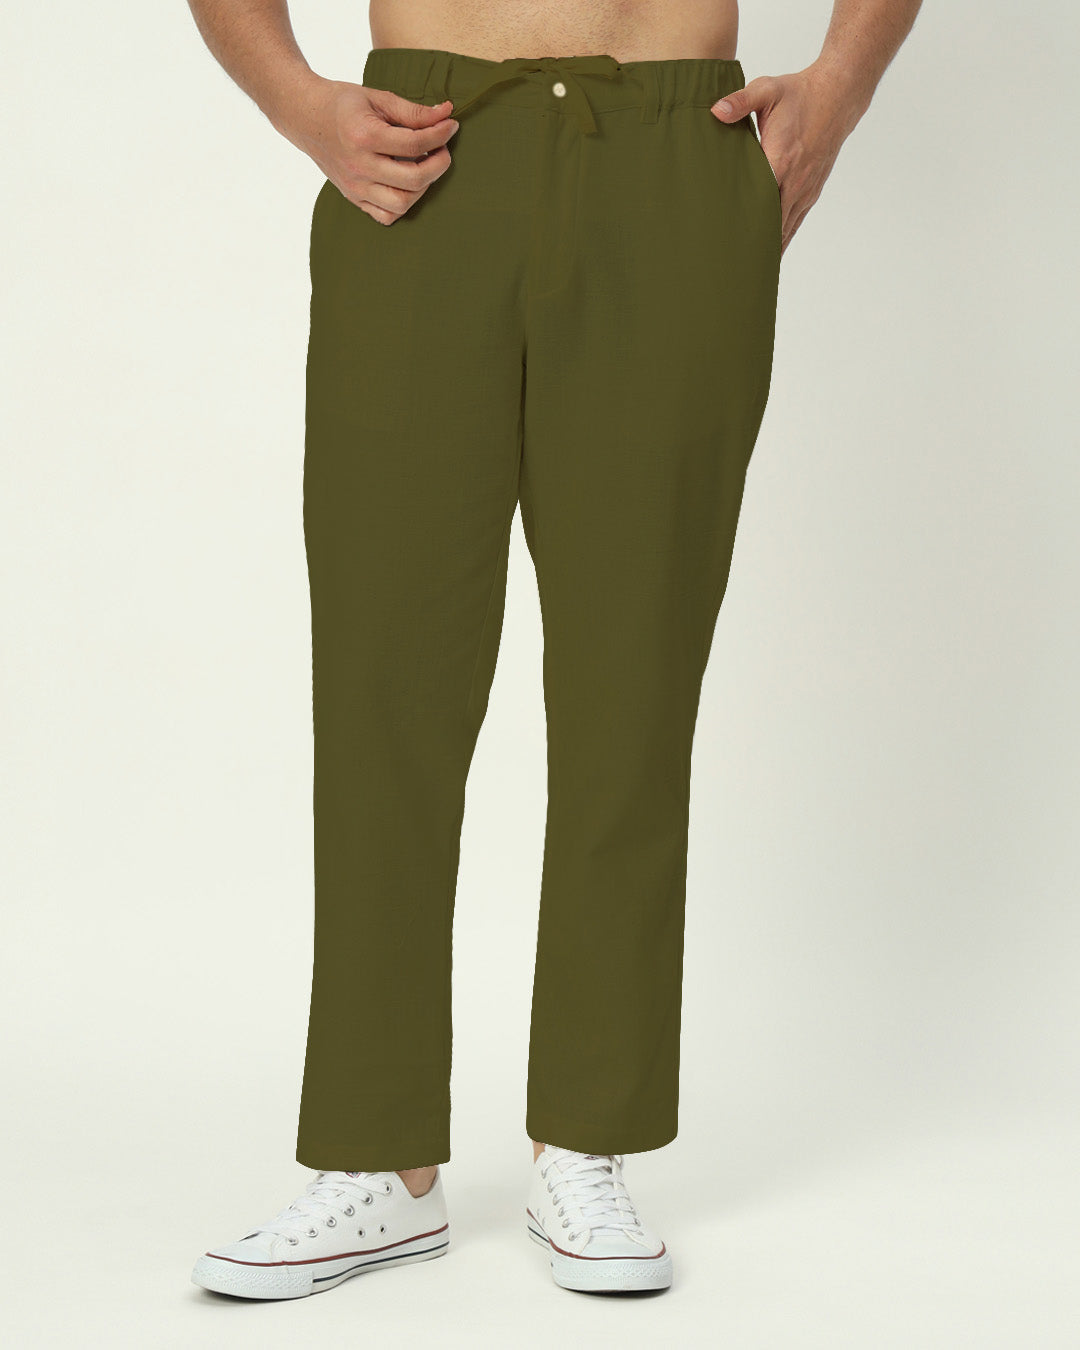 All-Day Wear Olive Green Men's Pants